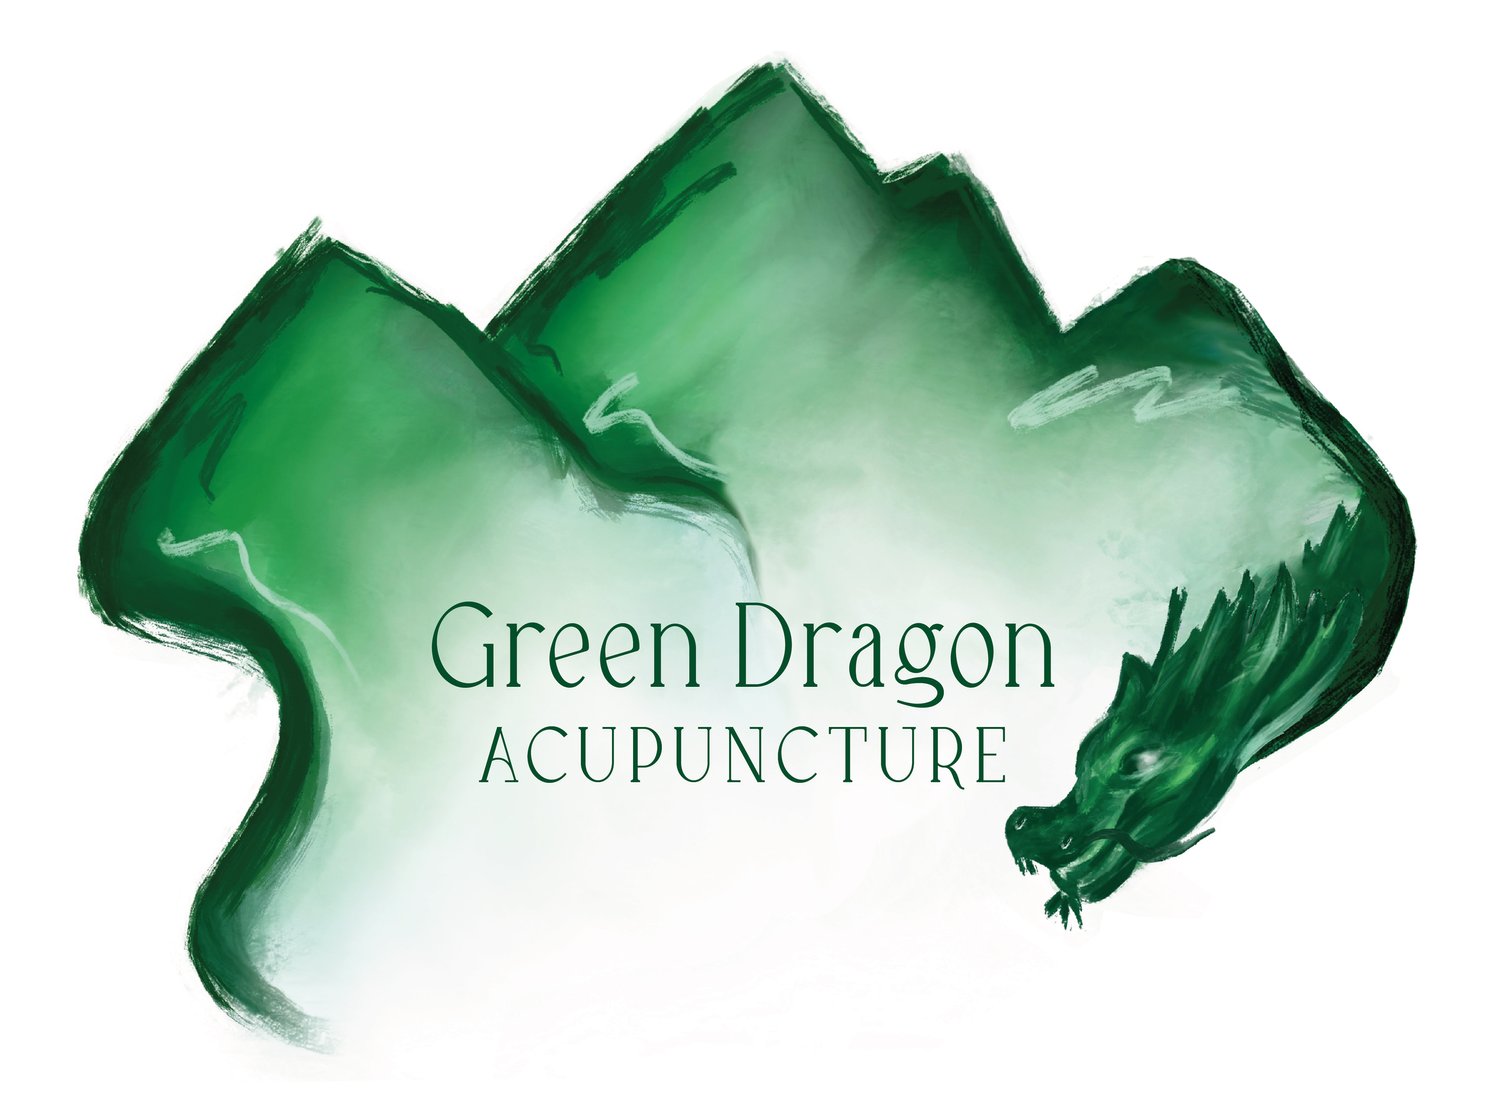 Green Dragon Acupuncture